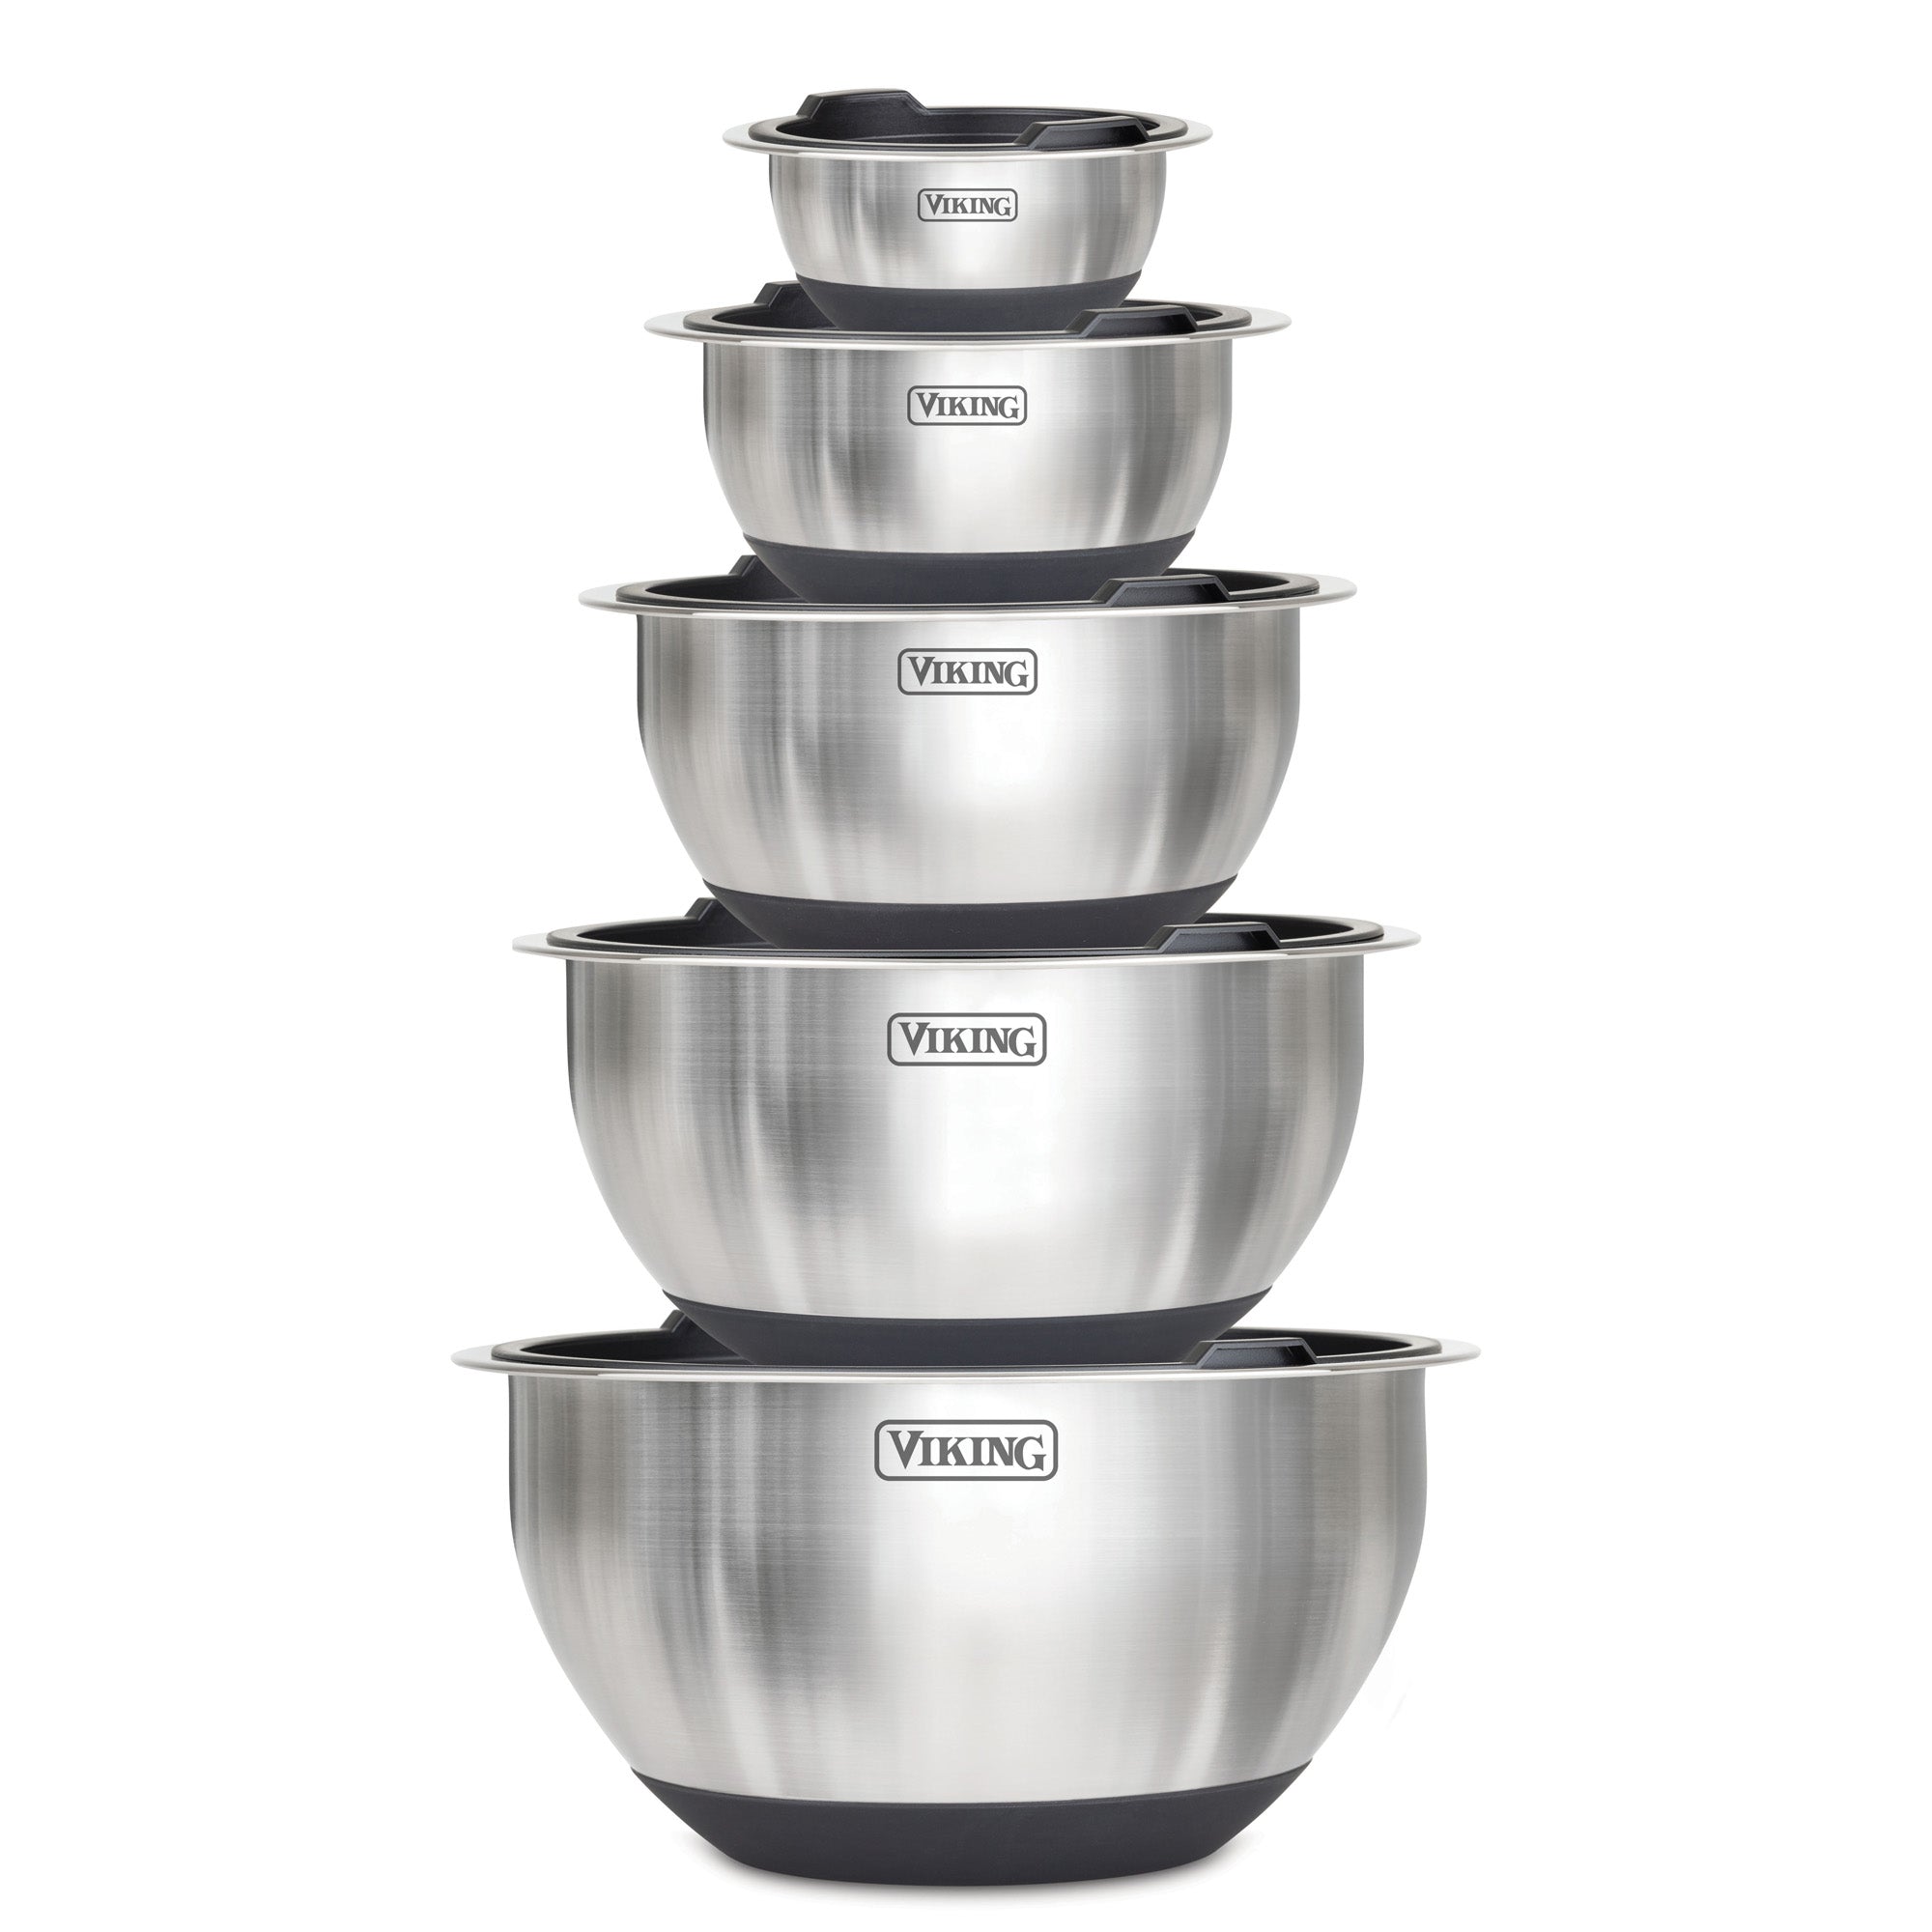 3-Piece Stainless Steel Mixing Bowl Set - Blue/Gray